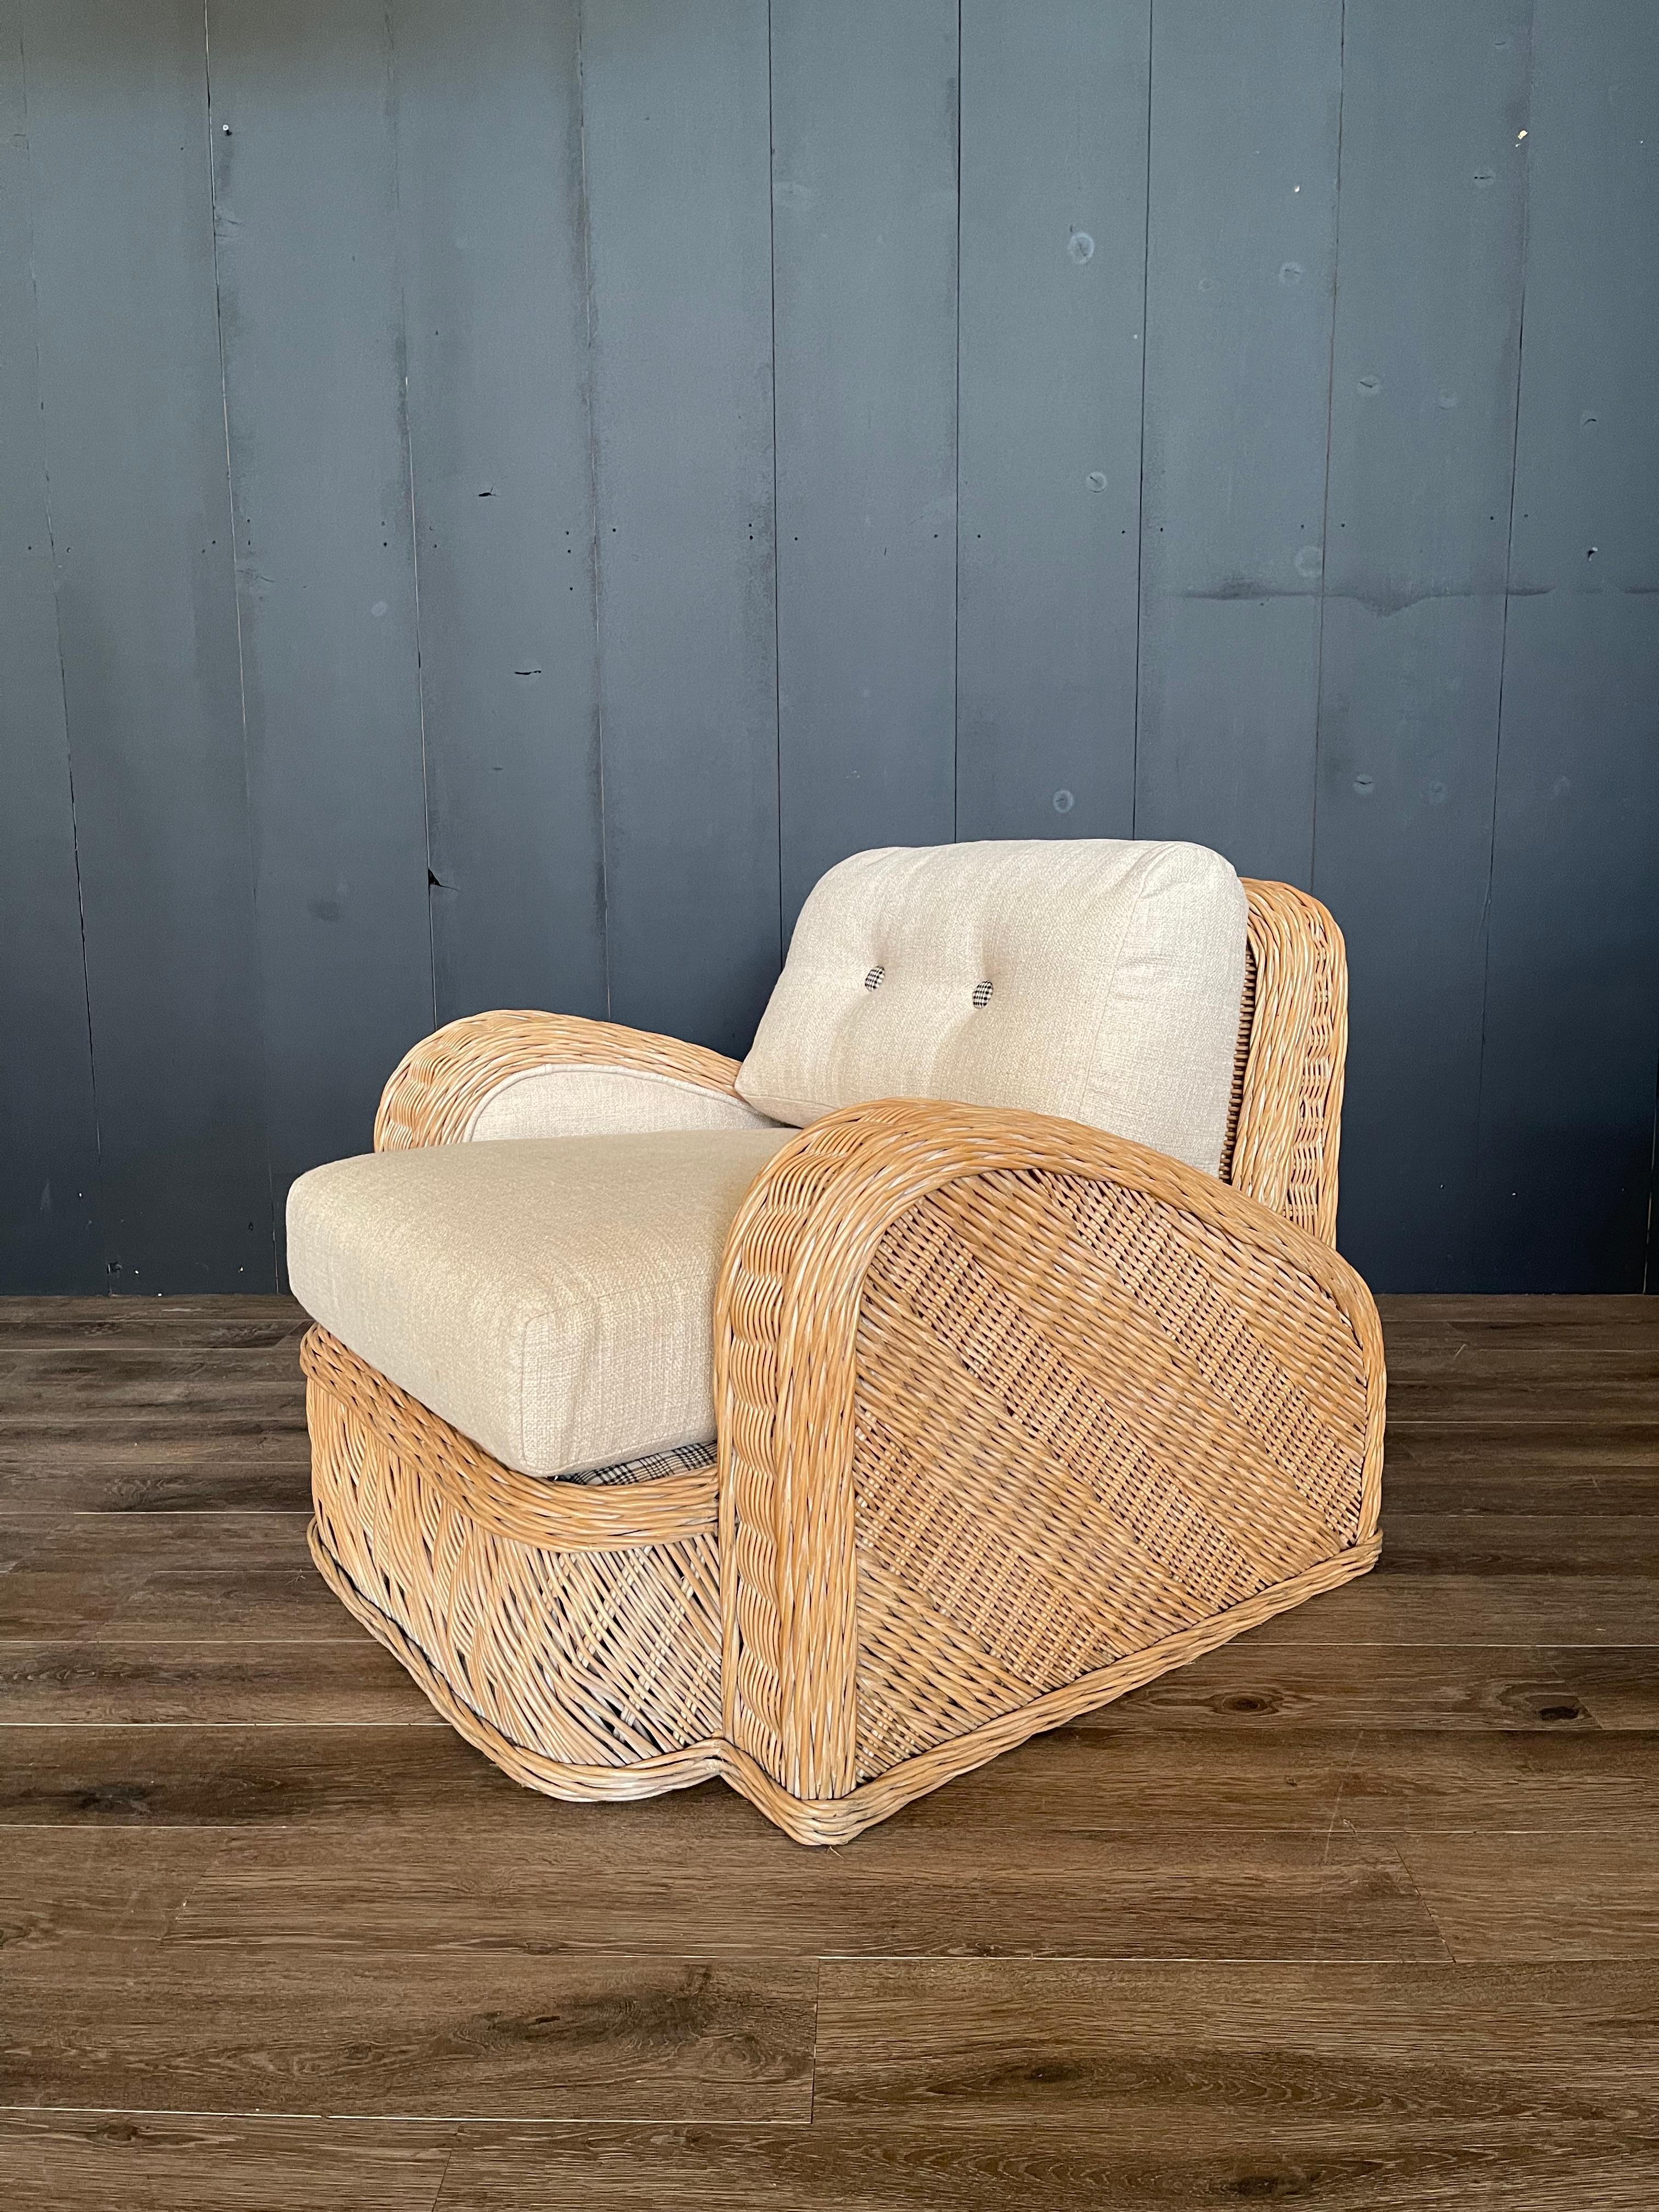 Post-Modern Jay Spectre Wicker Postmodern Chair, New Upholstery, Performance Fabric For Sale